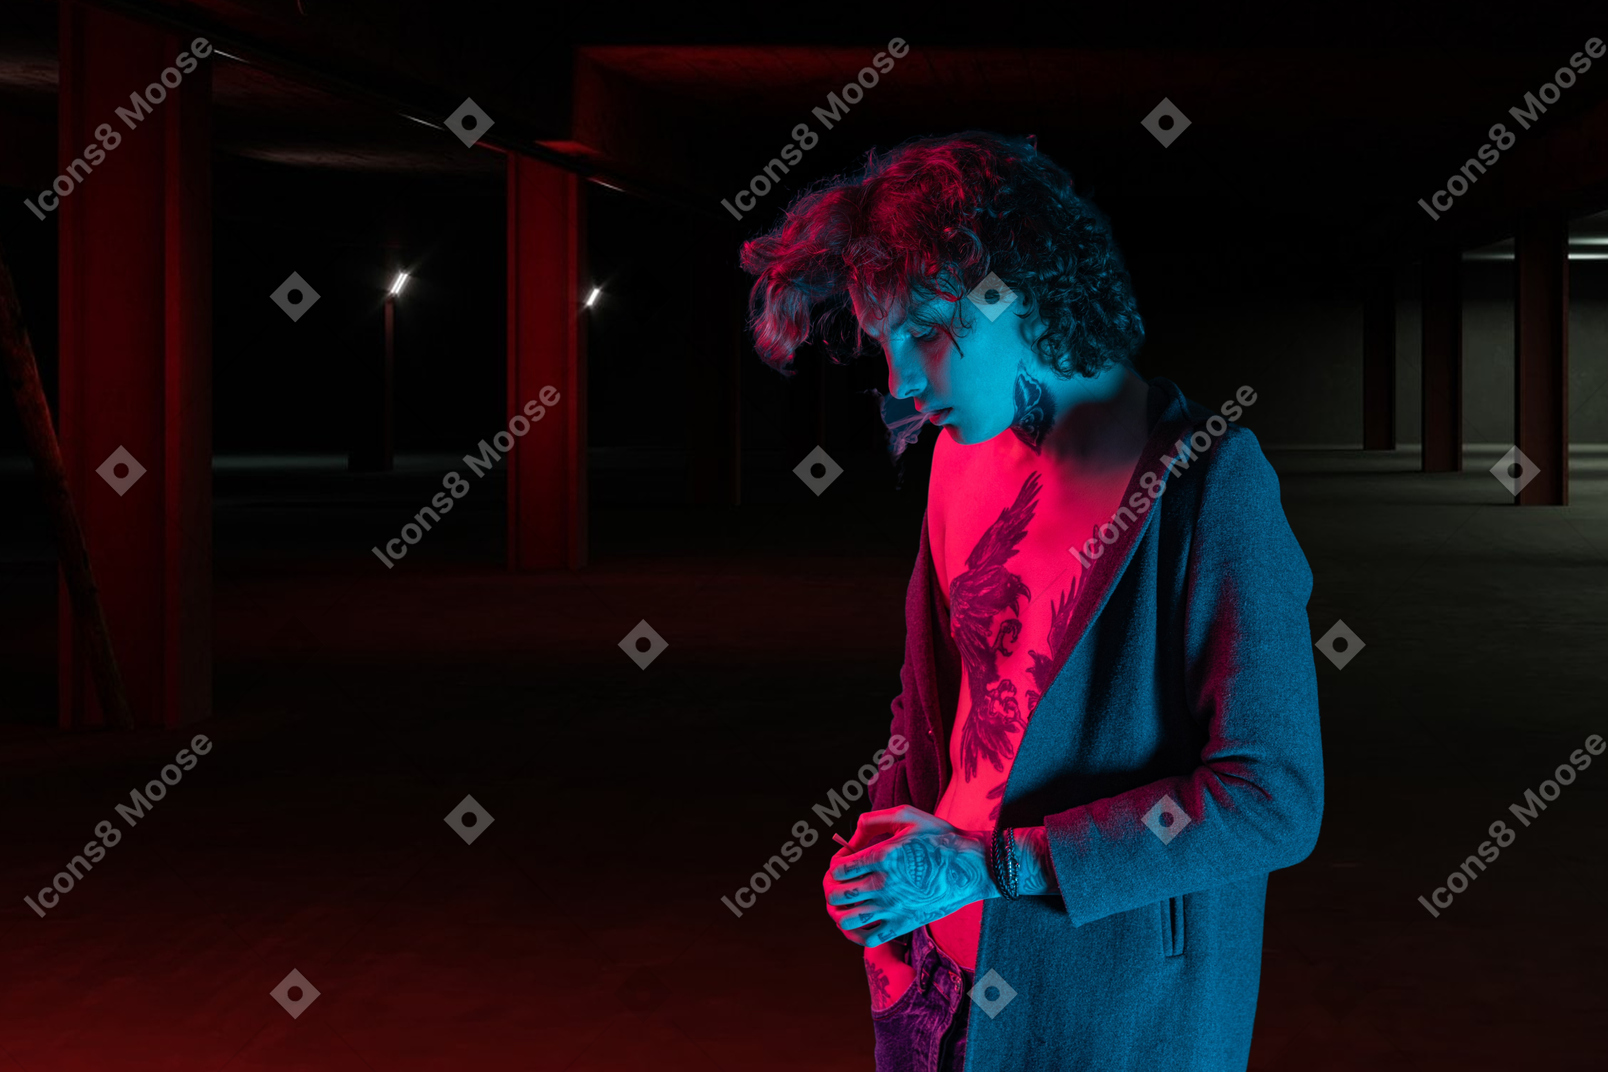 A young man standing in a dark parking garage and smoking